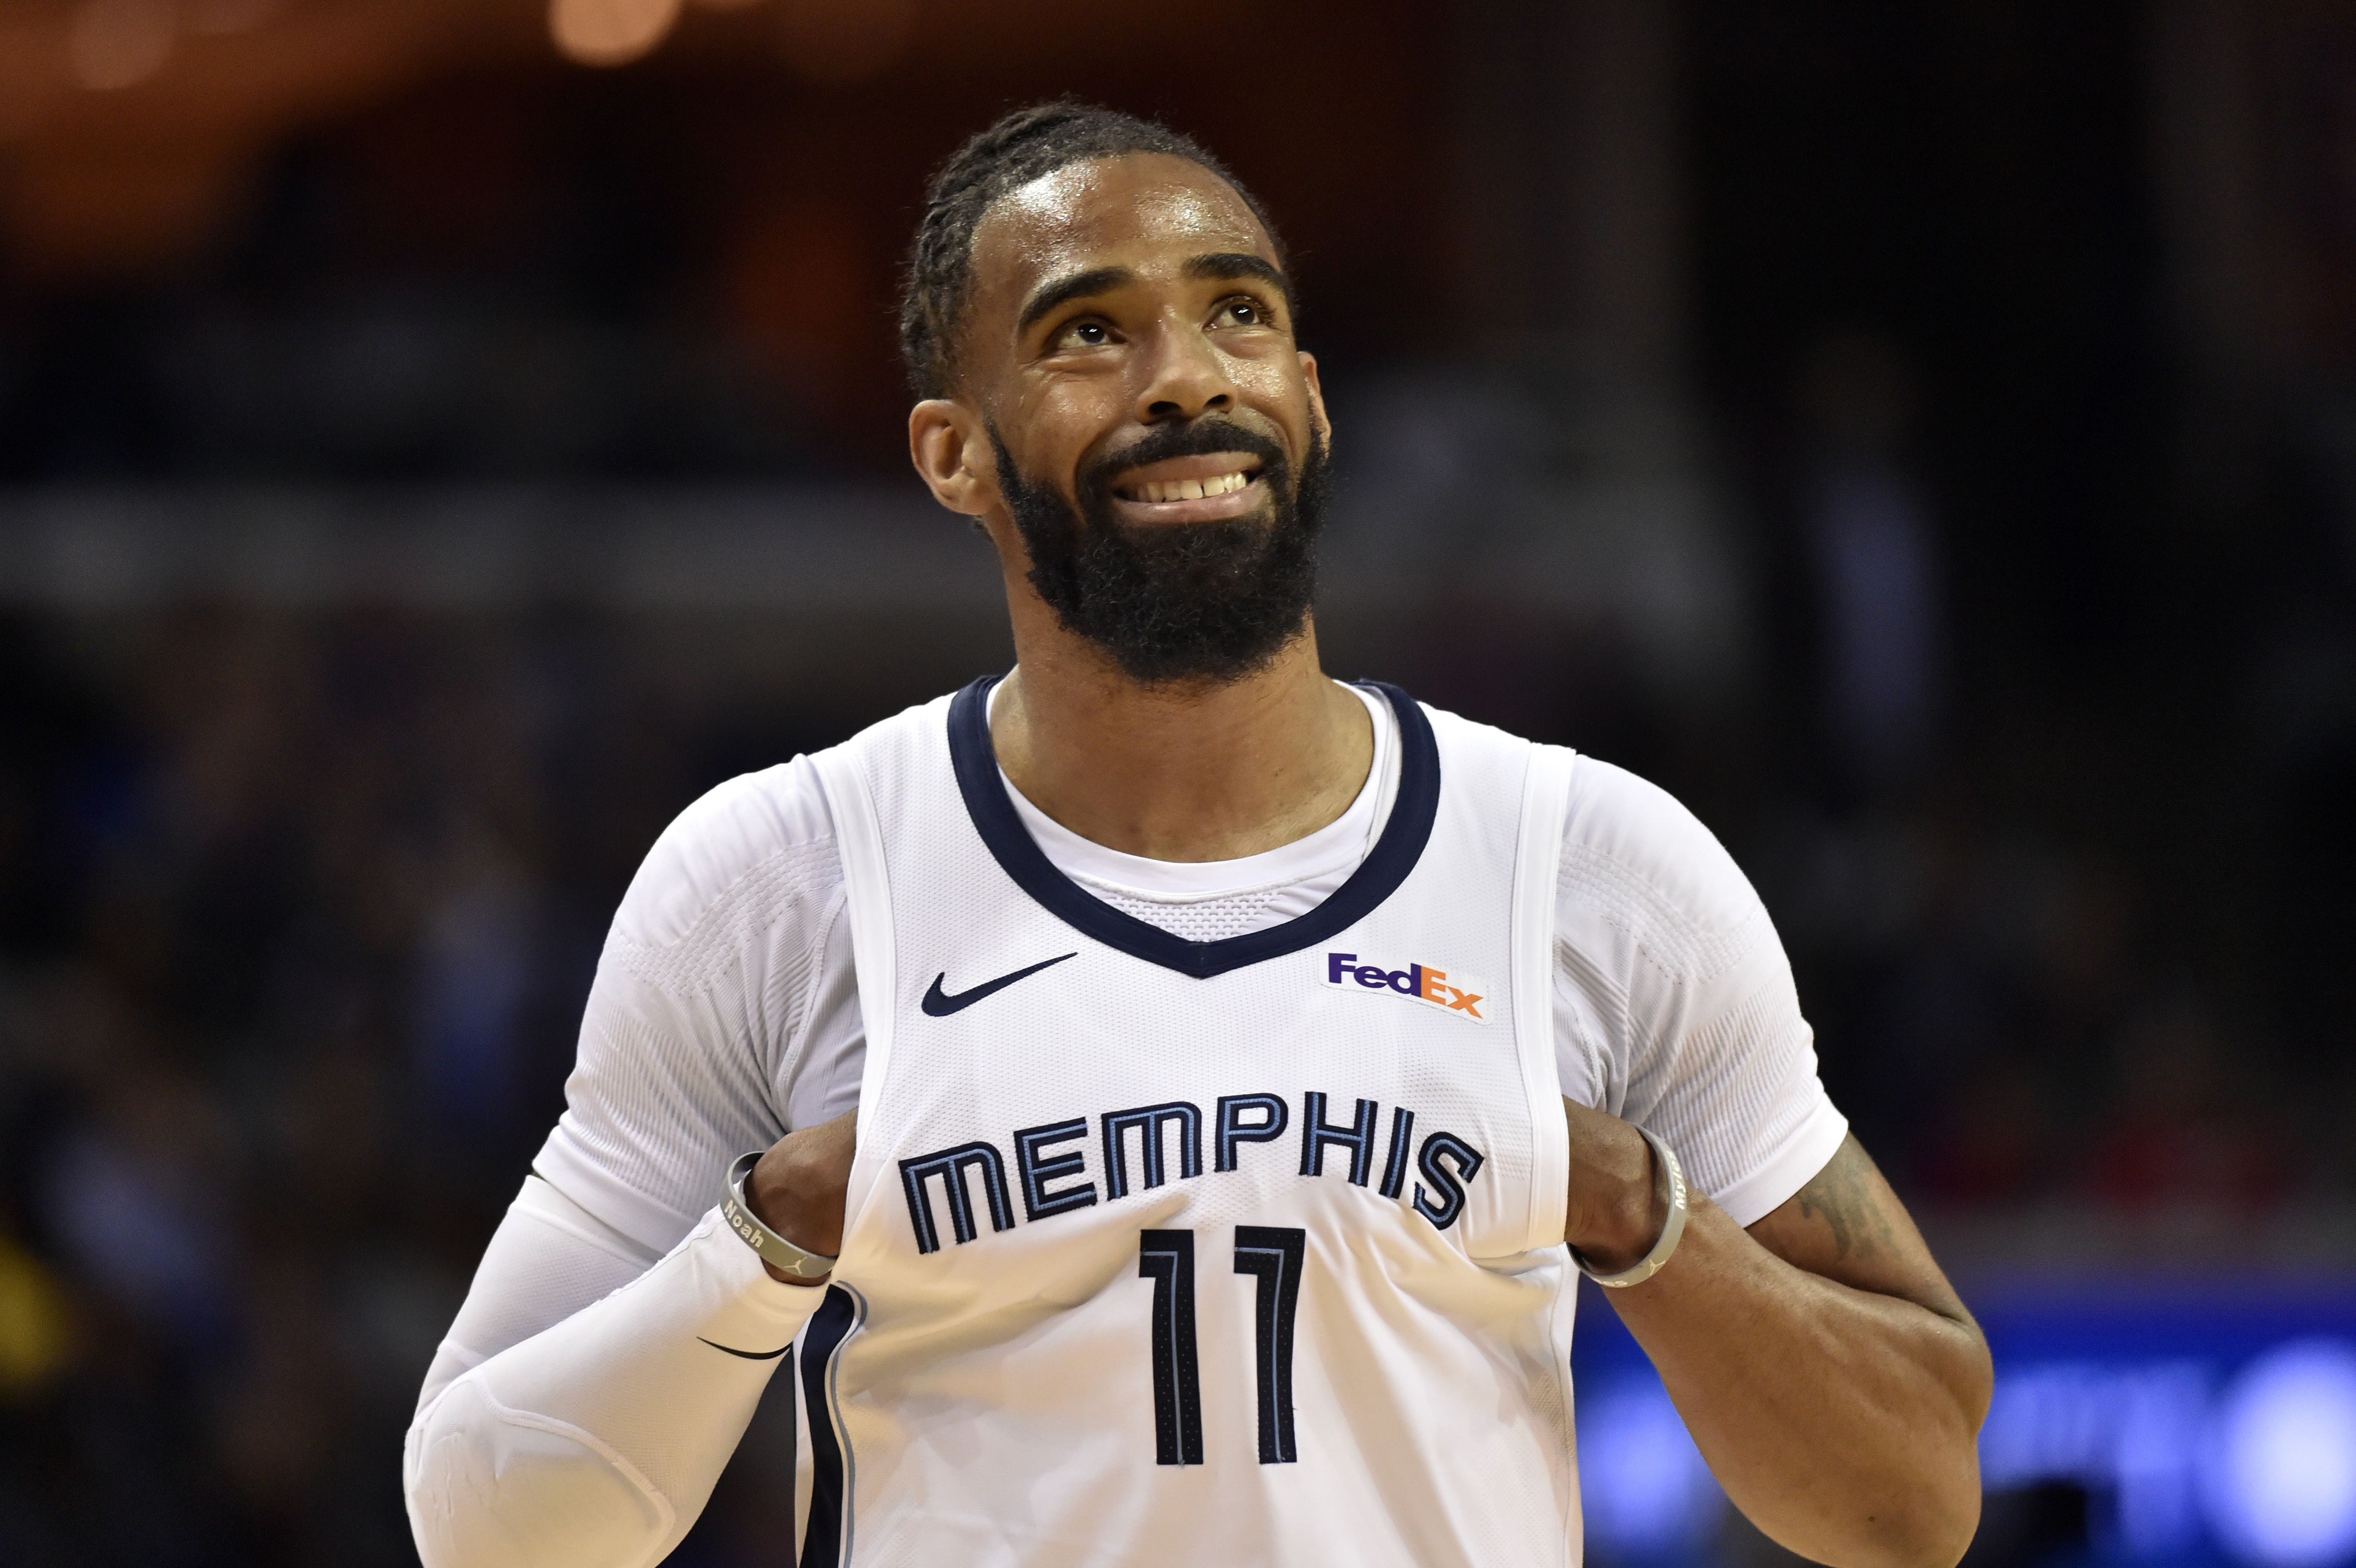 Nba Rumors Al Horford To Lakers Clippers Or Mavericks Grizzlies Mike Conley Traded To Jazz In Blockbuster Latest News Deals Nj Com